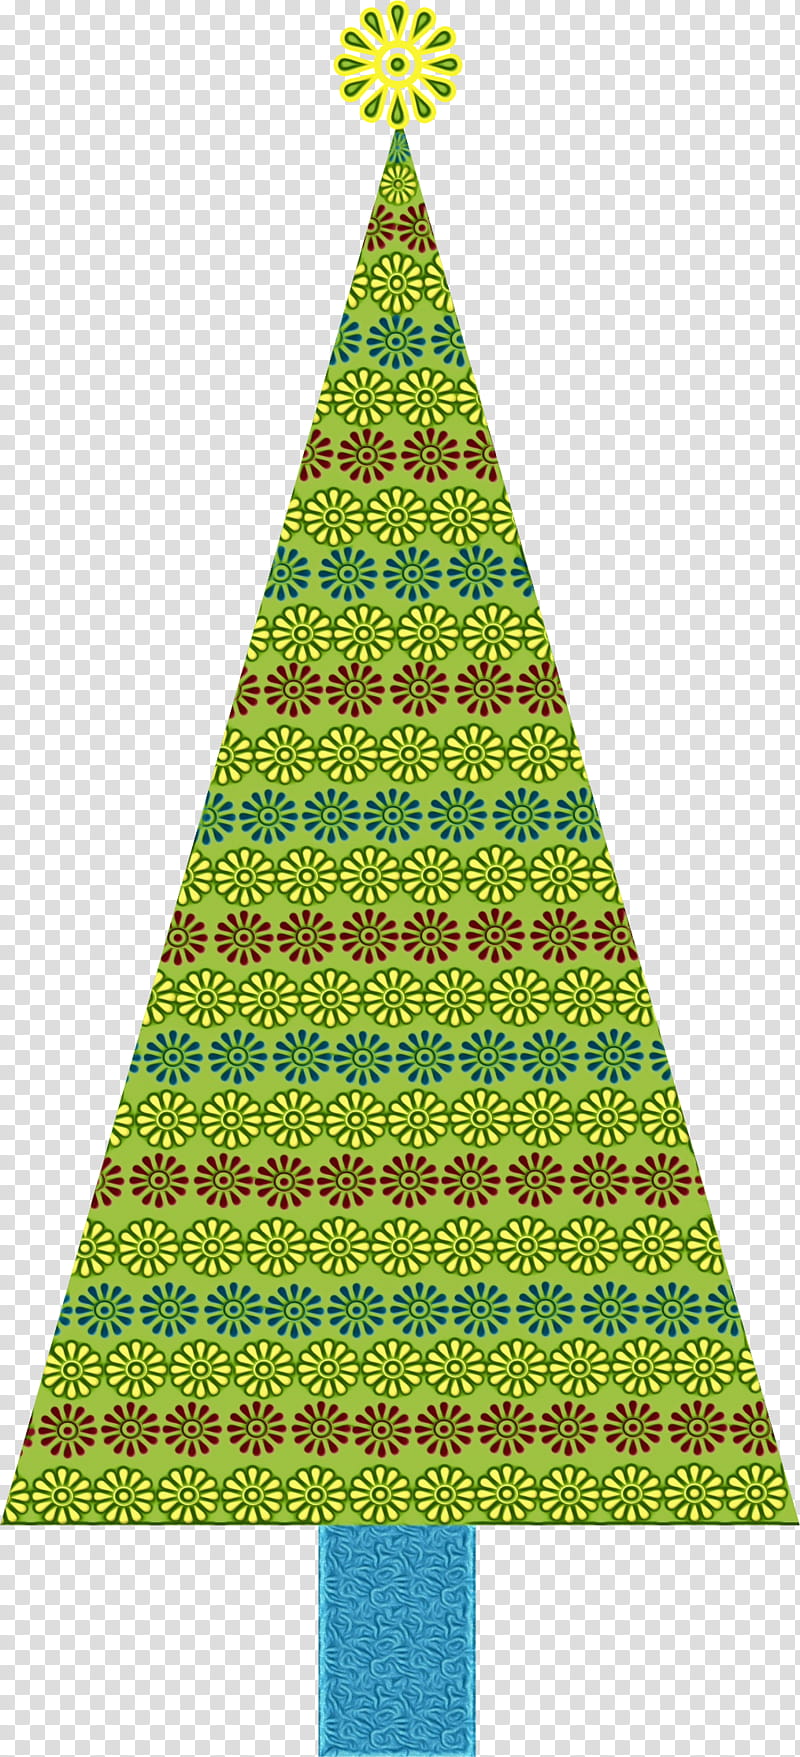 Christmas tree, Watercolor, Paint, Wet Ink, Green, Yellow, Textile, Triangle transparent background PNG clipart